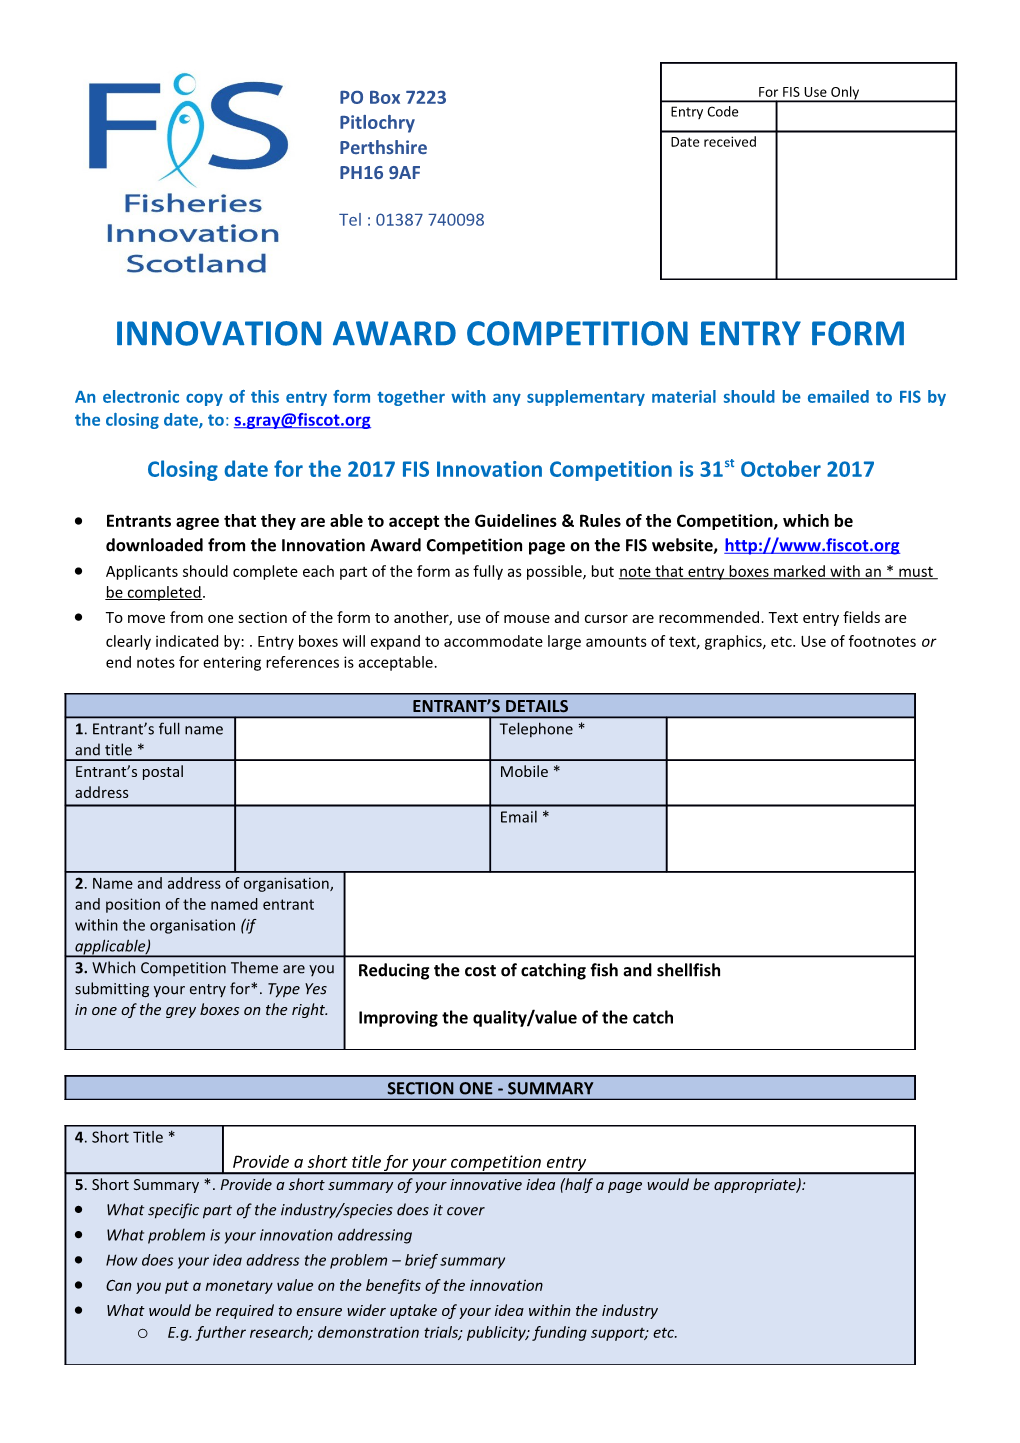 Innovation Award Competition Entry Form